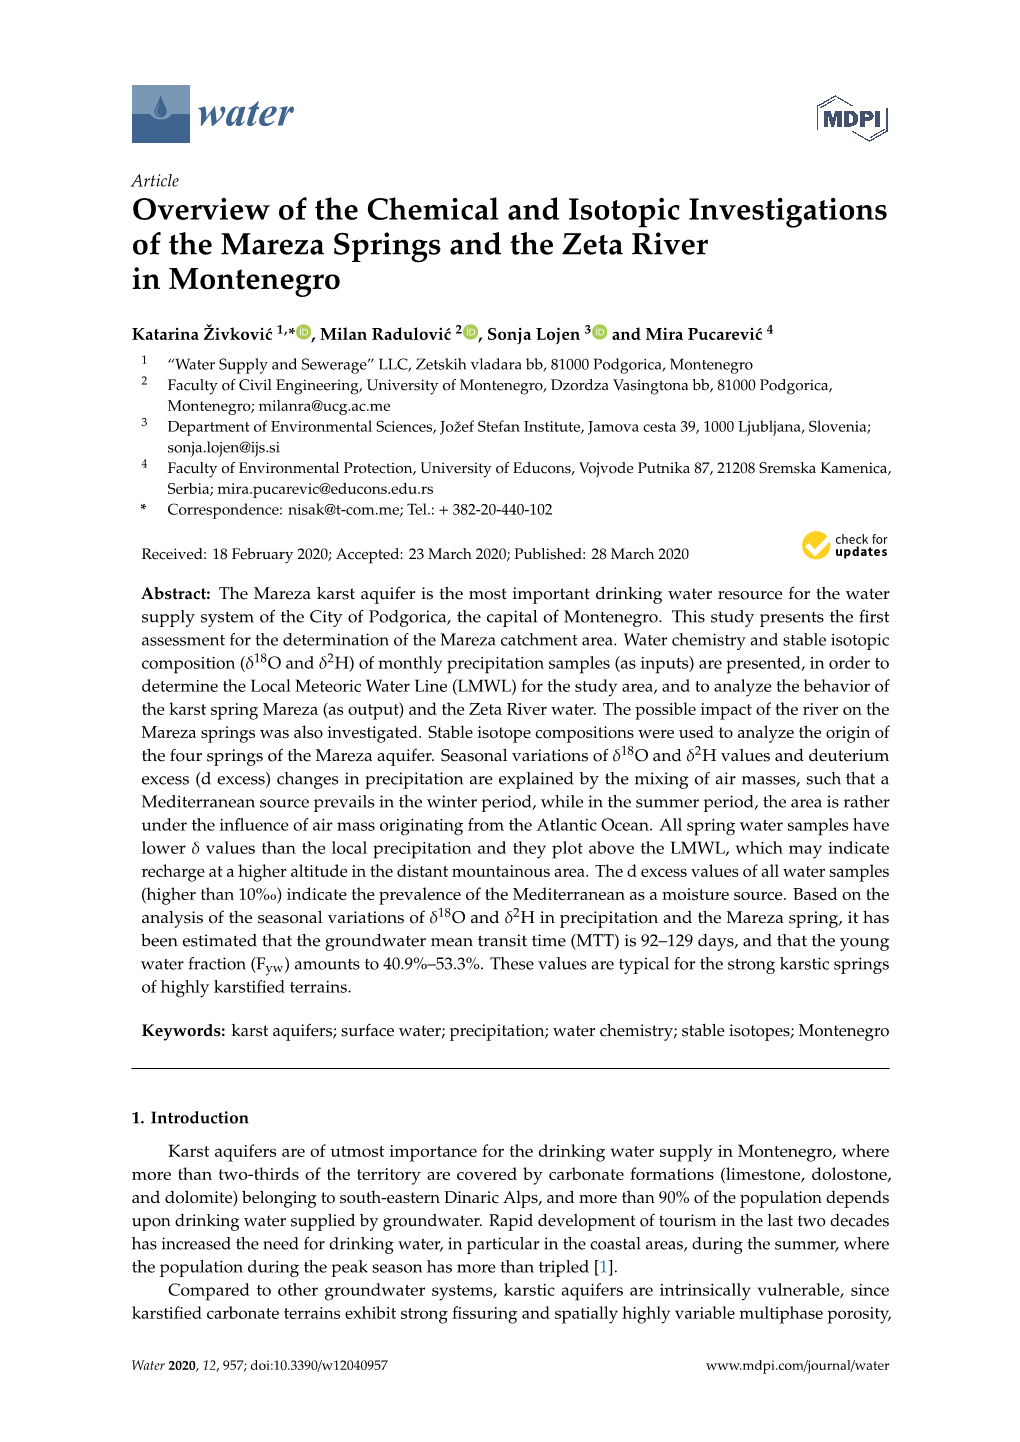 Overview of the Chemical and Isotopic Investigations of the Mareza Springs and the Zeta River in Montenegro